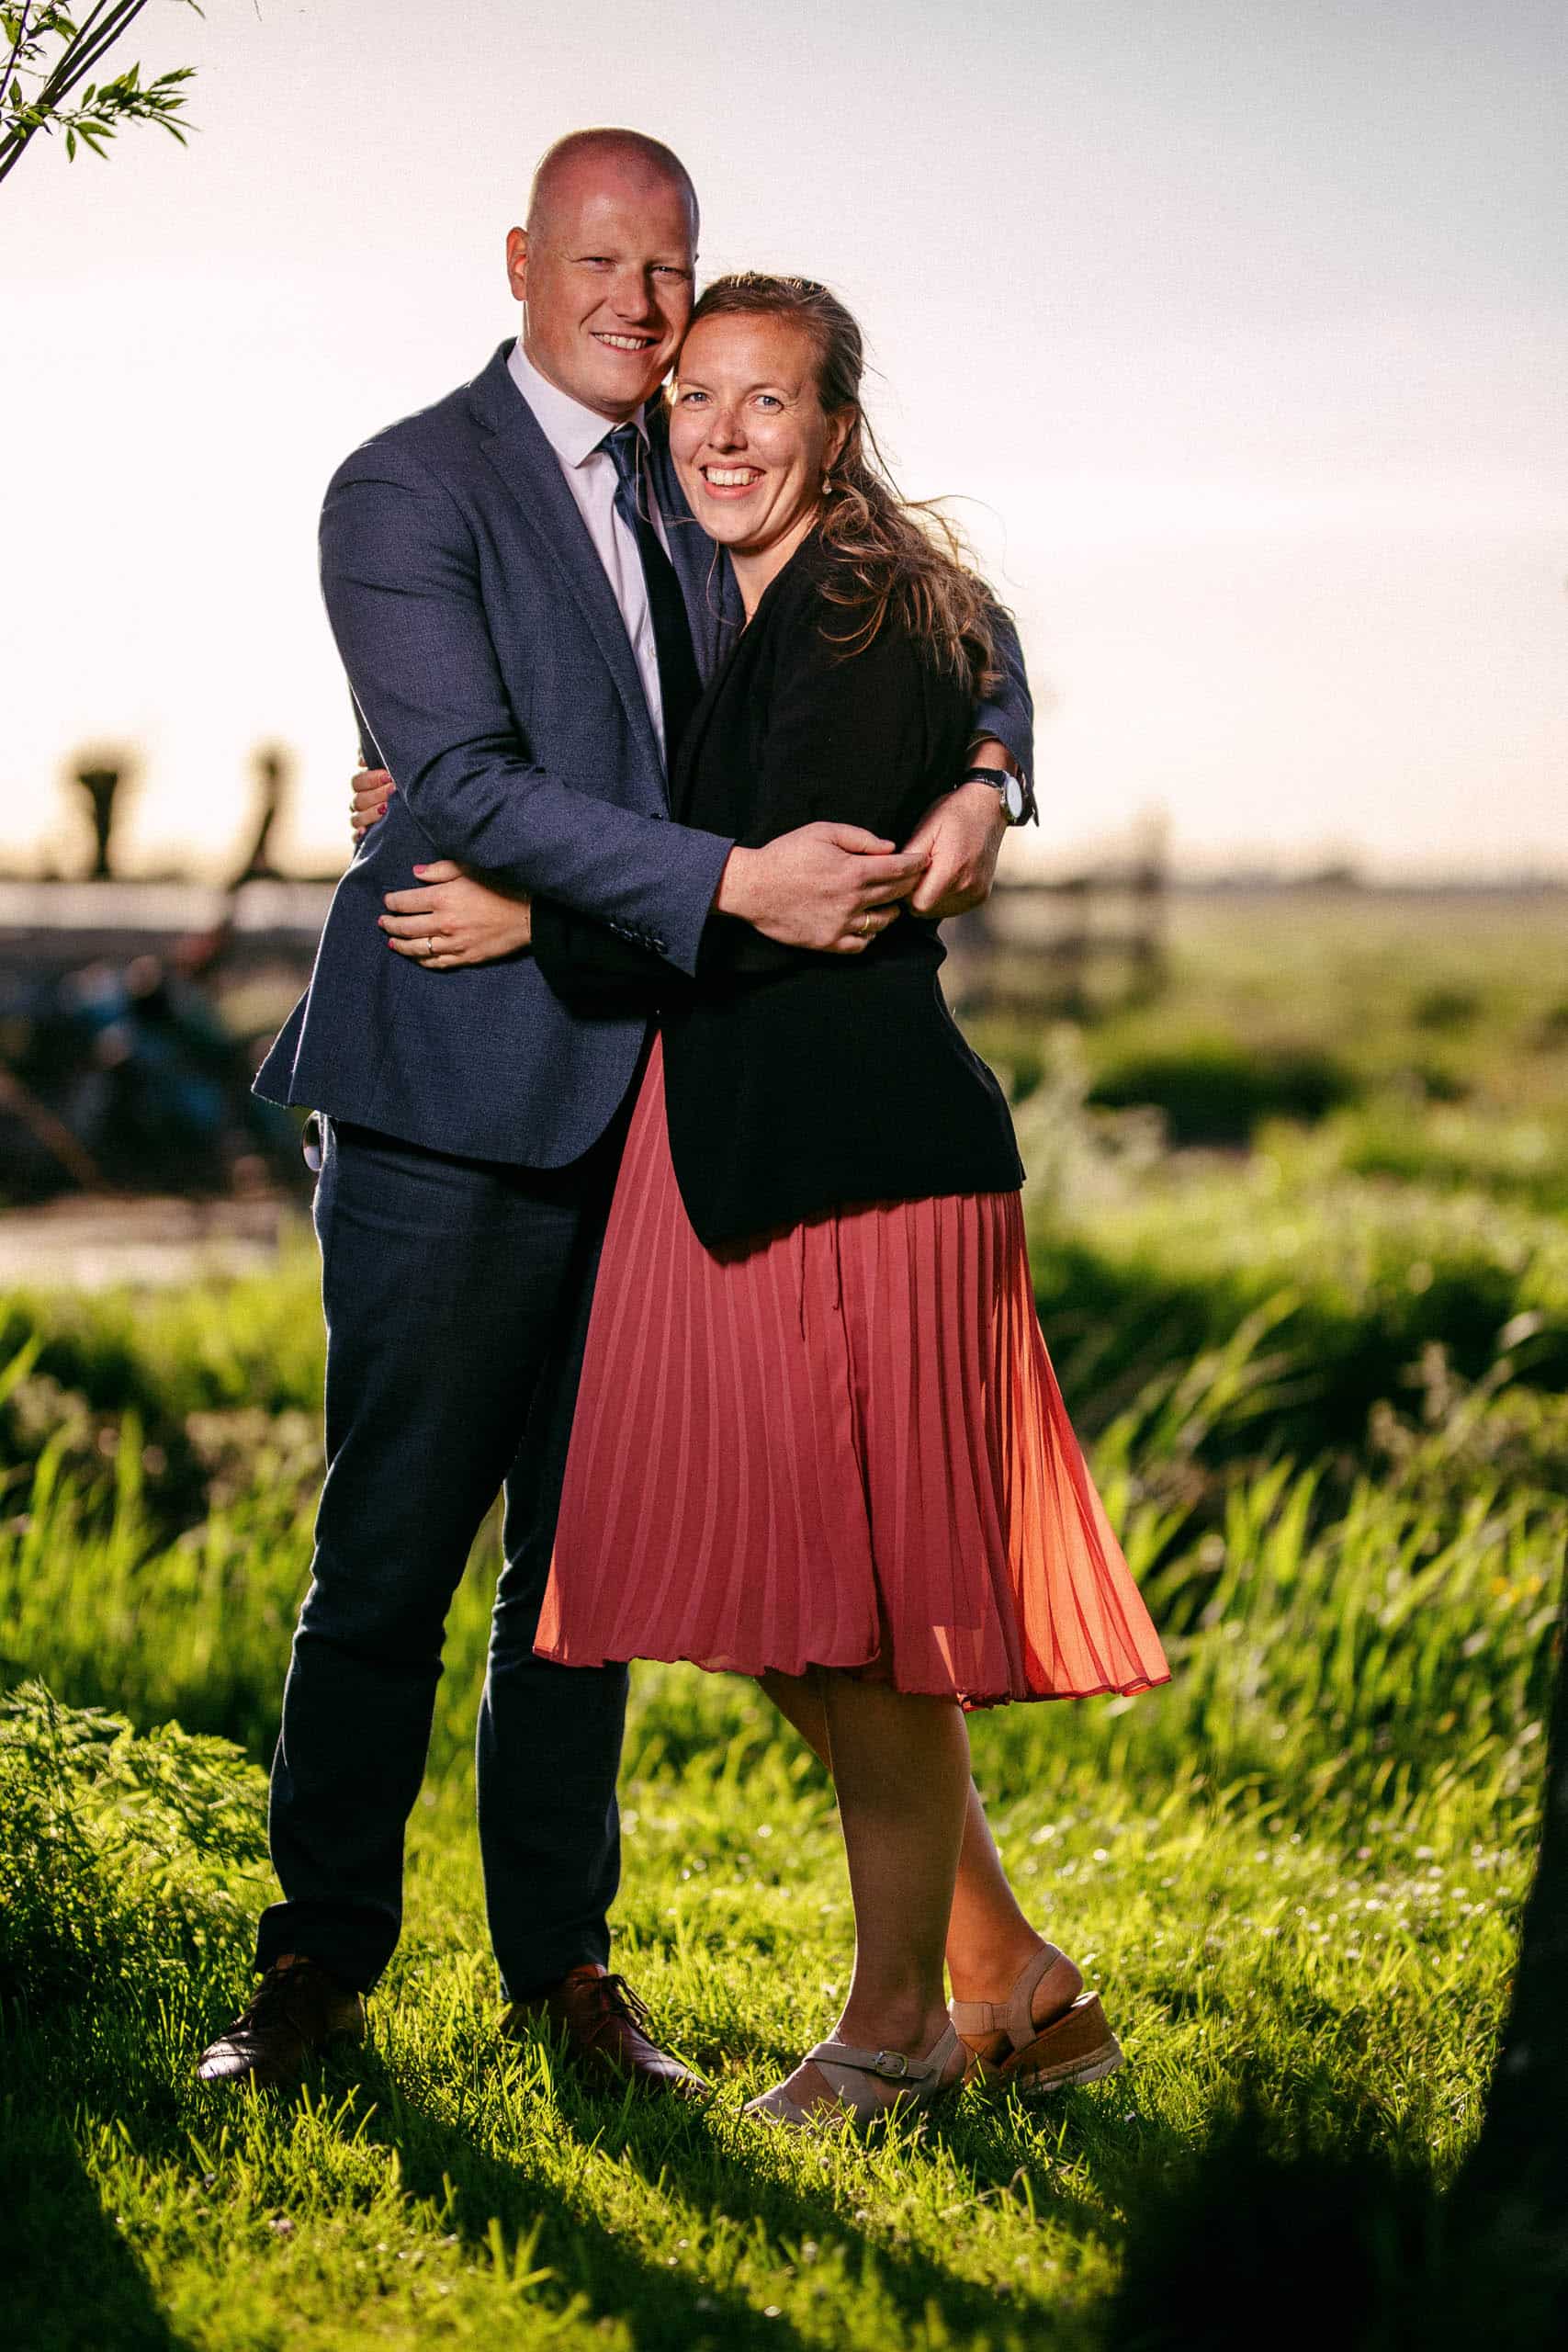 A man and a woman embracing in a field at sunset, dressed in Tenue de ville attire.